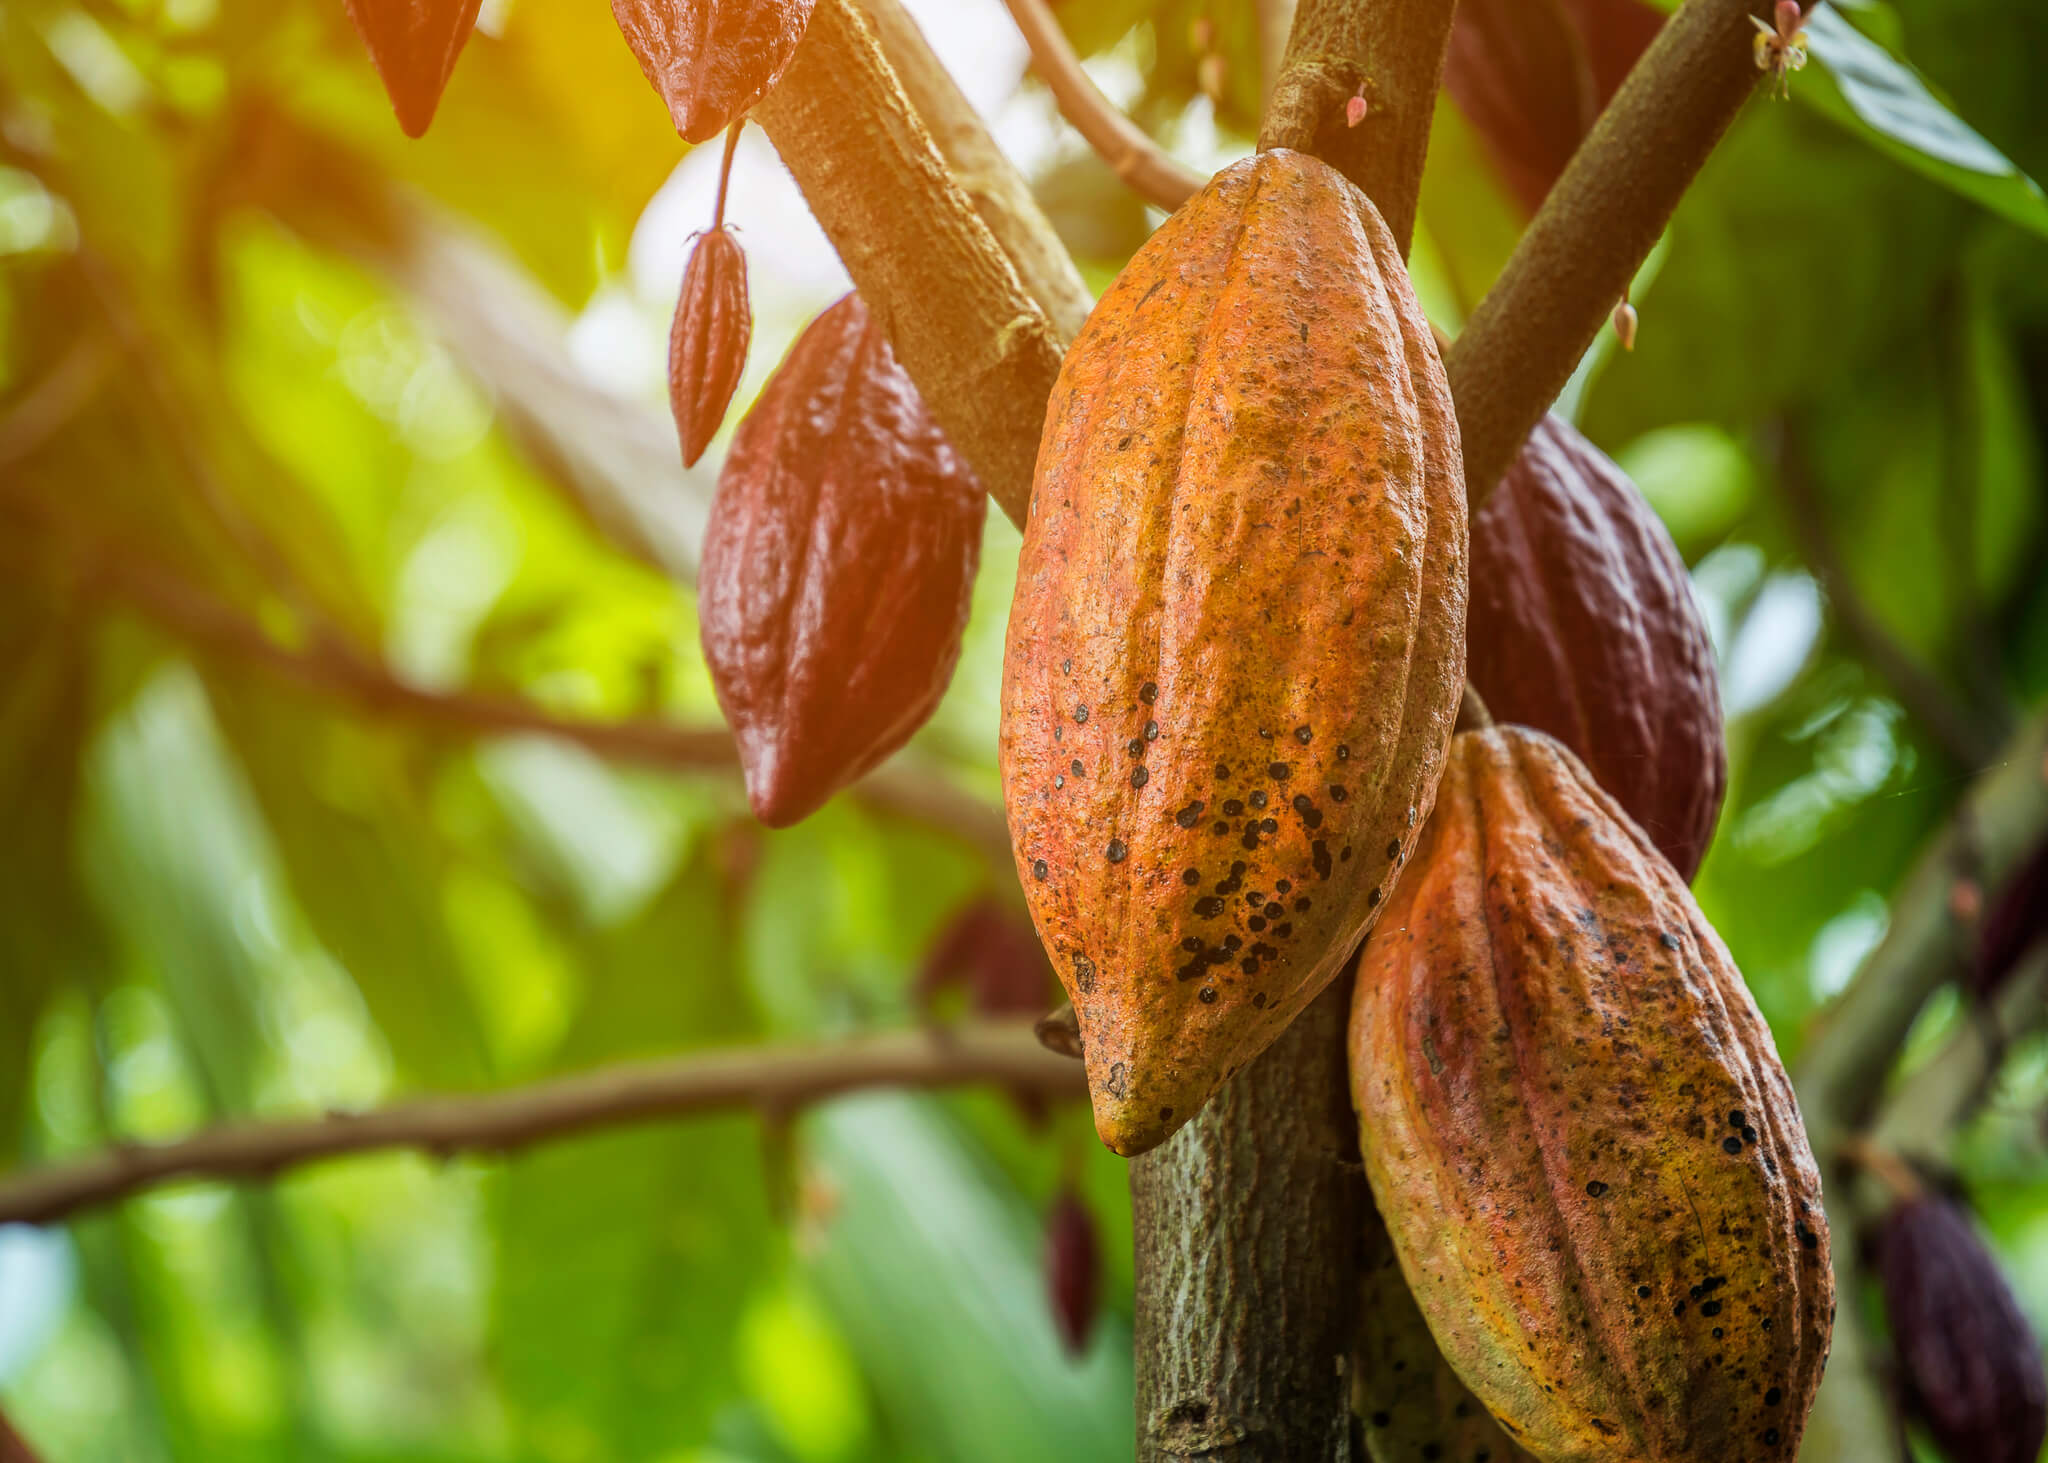 A cocoa tree with fruits